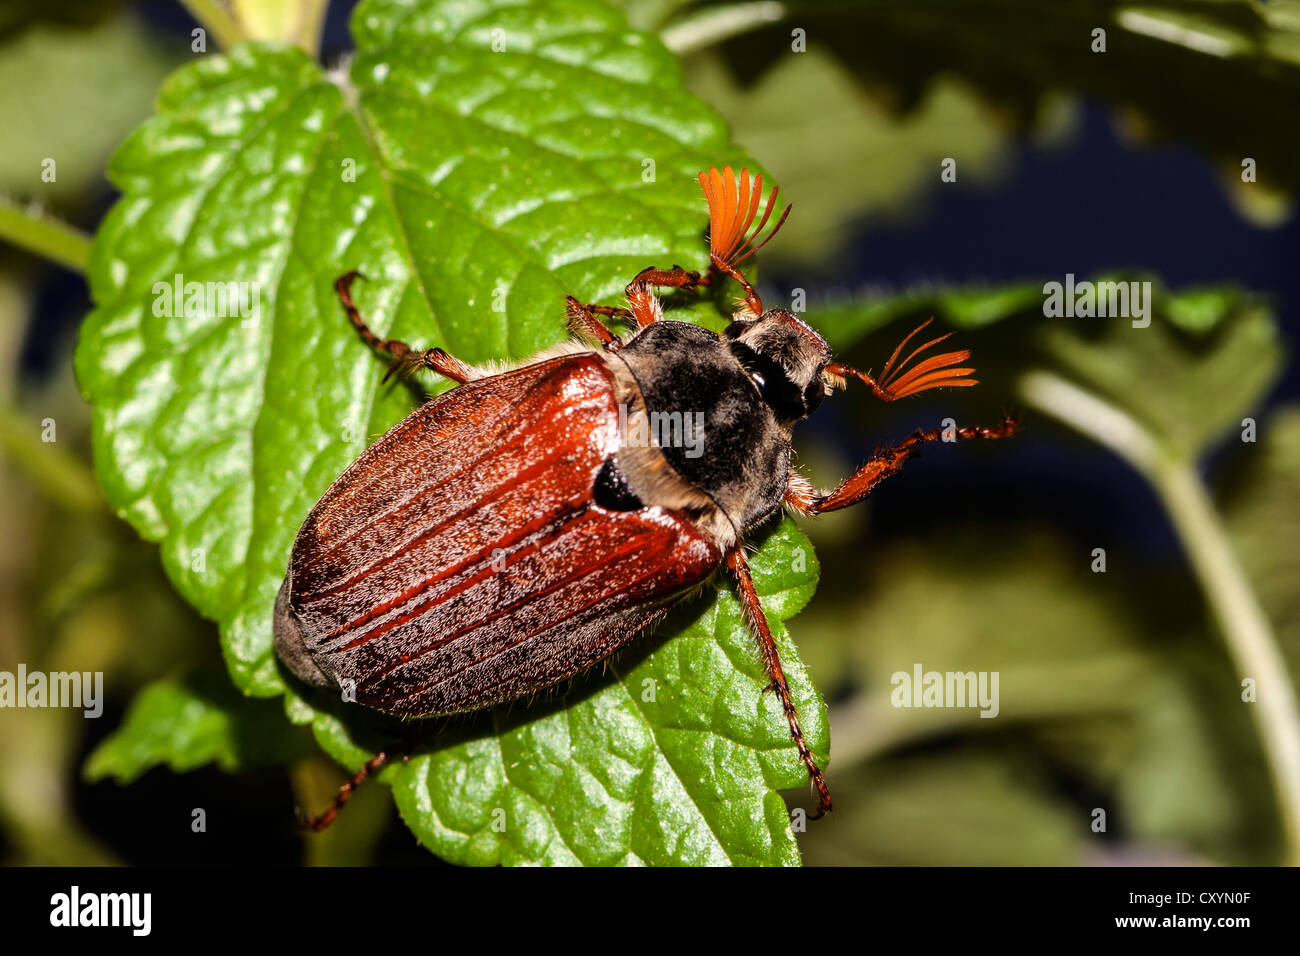 Cockchafer or May Bug (Melolontha melolontha) on a mint leaf Stock Photo